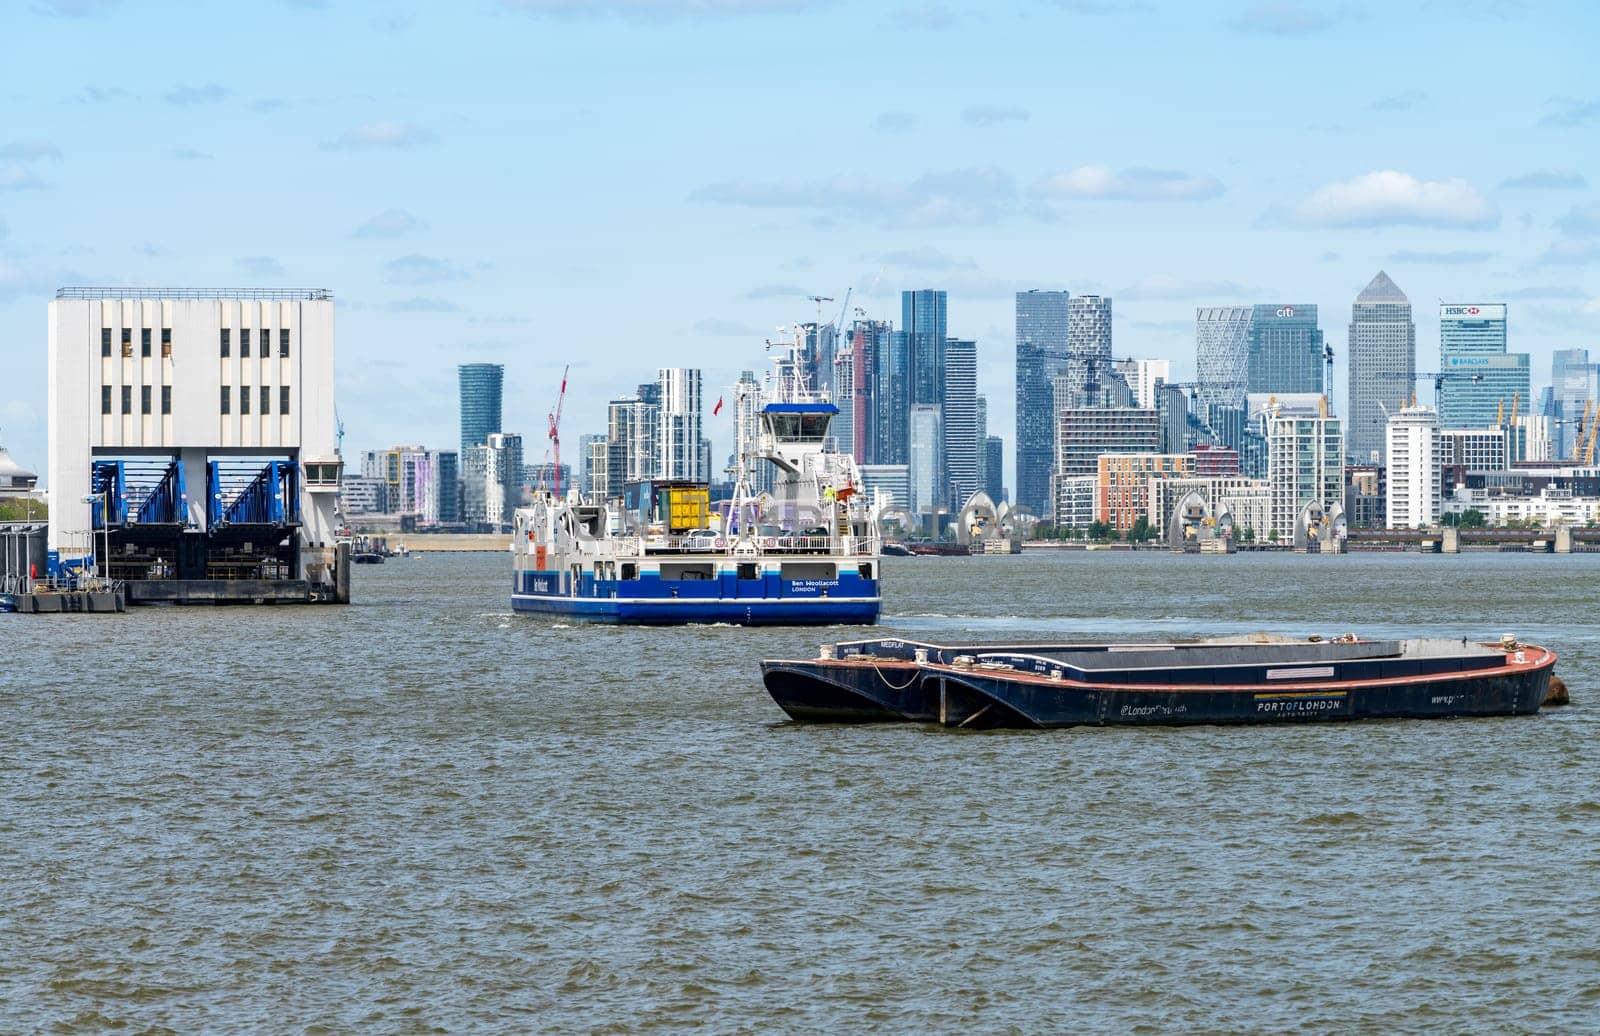 Woolwich, London - 15 May 2023: Car Ferry approaches Woolwich Ferry terminal on Thames